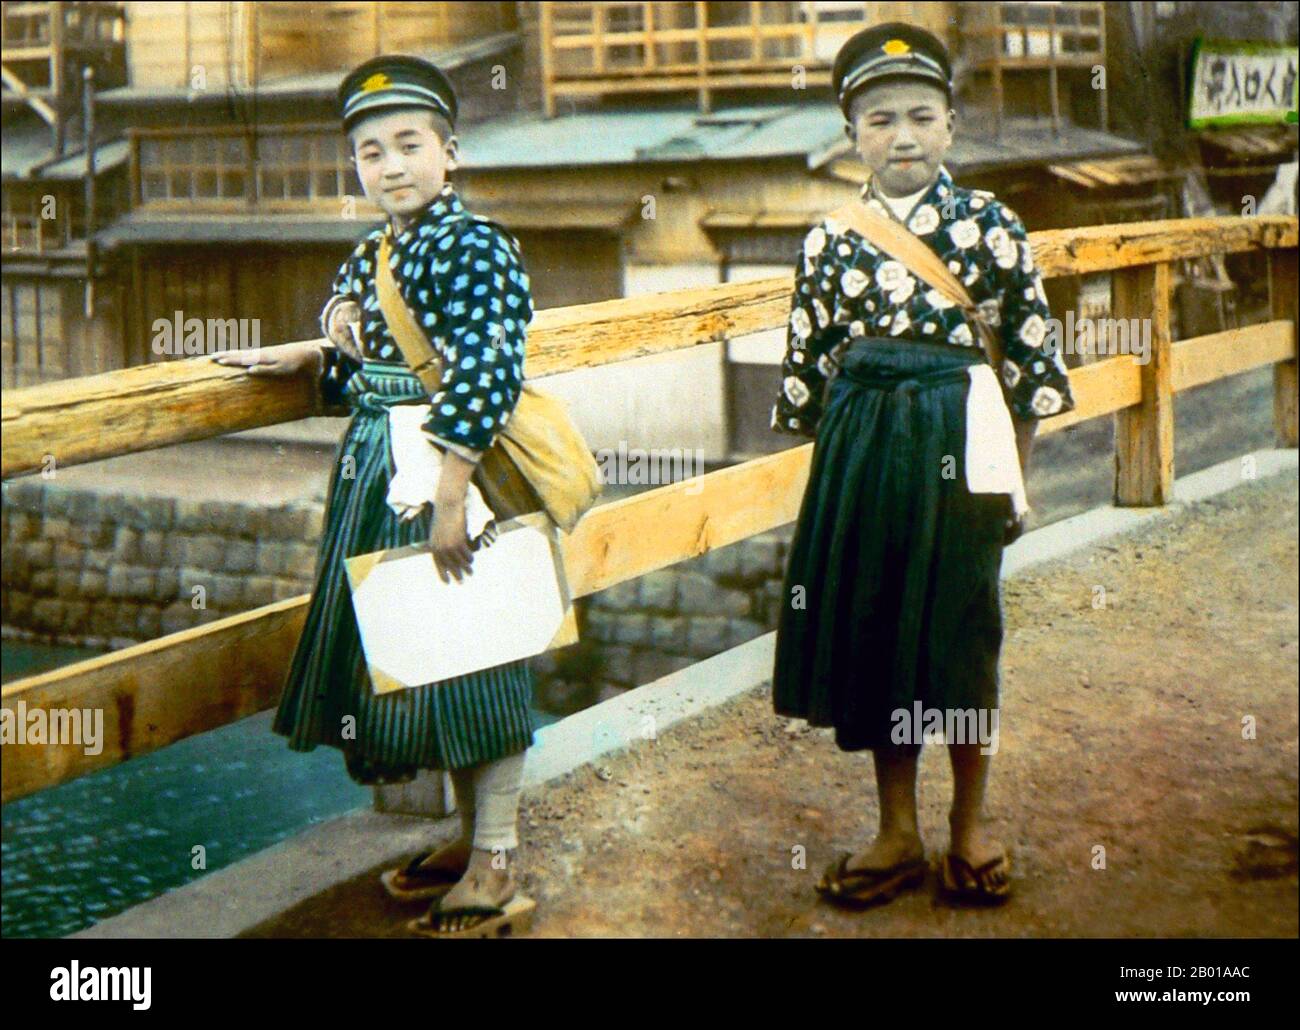 Japan: Two young schoolboys on their way to school. Photo by T. Enami (1859-1929), c. 1910.  T. Enami (Enami Nobukuni) was the trade name of a celebrated Meiji period photographer. The T. of his trade name is thought to have stood for Toshi, though he never spelled it out on any personal or business document.  Born in Edo (now Tokyo) during the Bakumatsu era, Enami was first a student of, and then an assistant to the well known photographer and collotypist, Ogawa Kazumasa. Enami relocated to Yokohama, and opened a studio on Benten-dōri (Benten Street) in 1892. Stock Photo